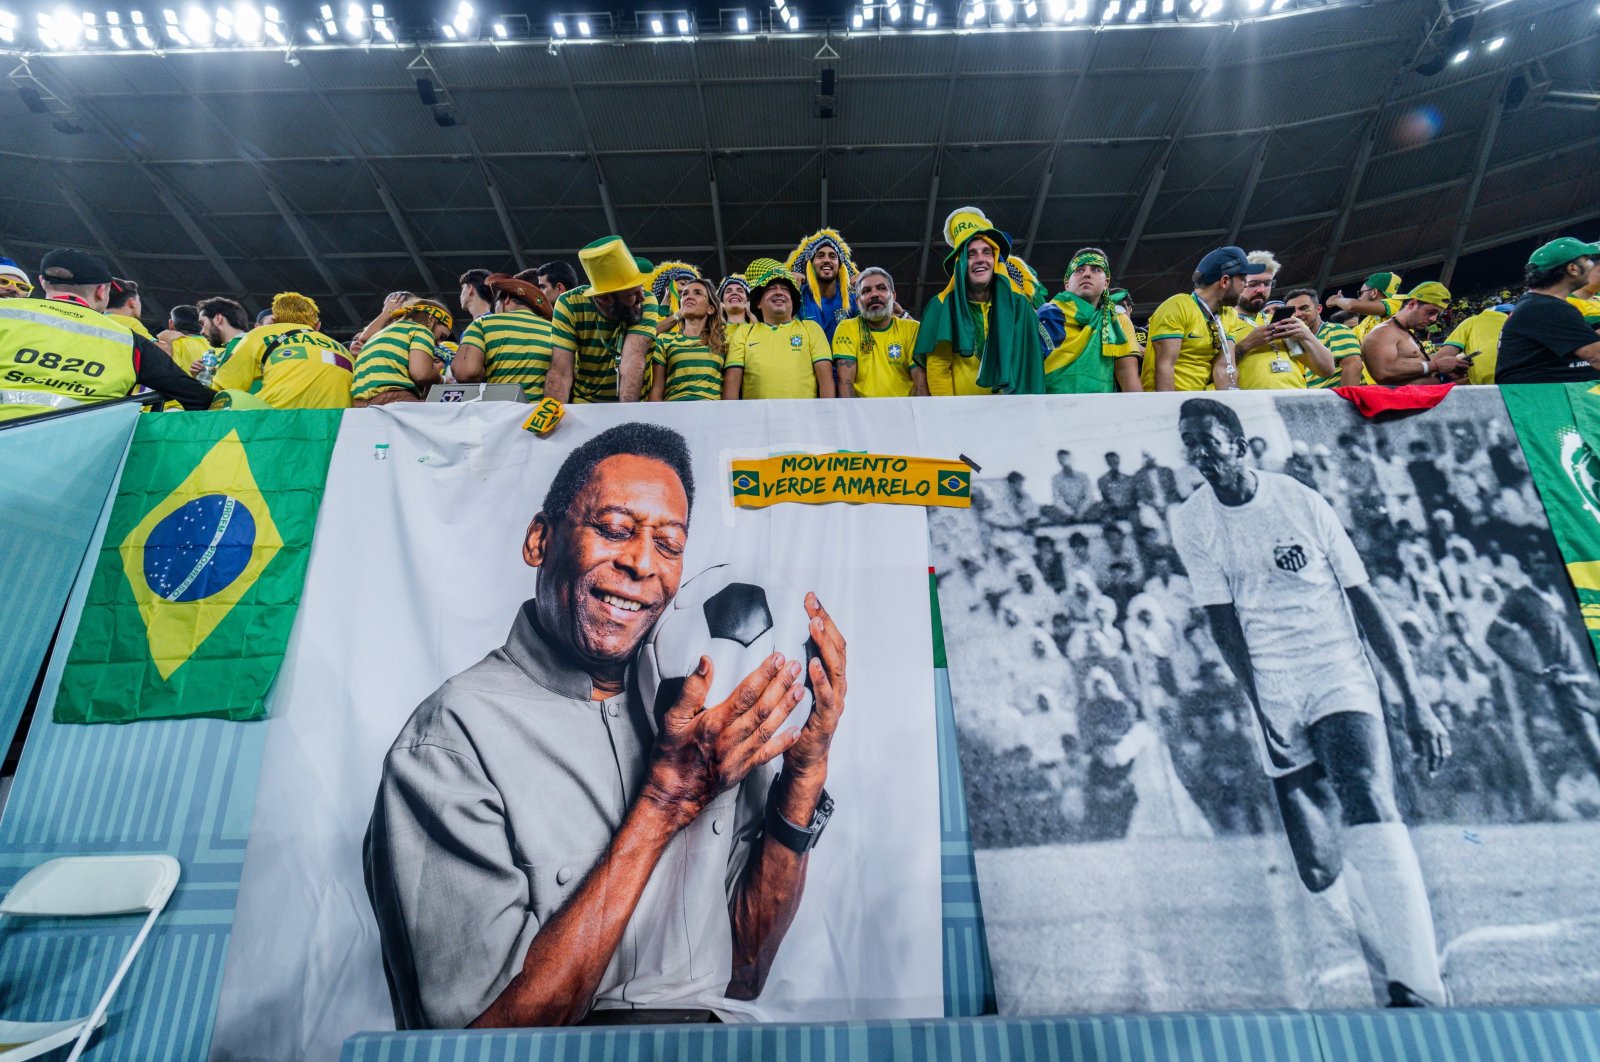 Brazil fans show their support with a banner depicting former Brazil player Pele during the FIFA World Cup Qatar 2022 Round of 16 match between Brazil and South Korea at Stadium 974, Doha, Qatar, Dec. 5, 2022. (Getty Images Photo)